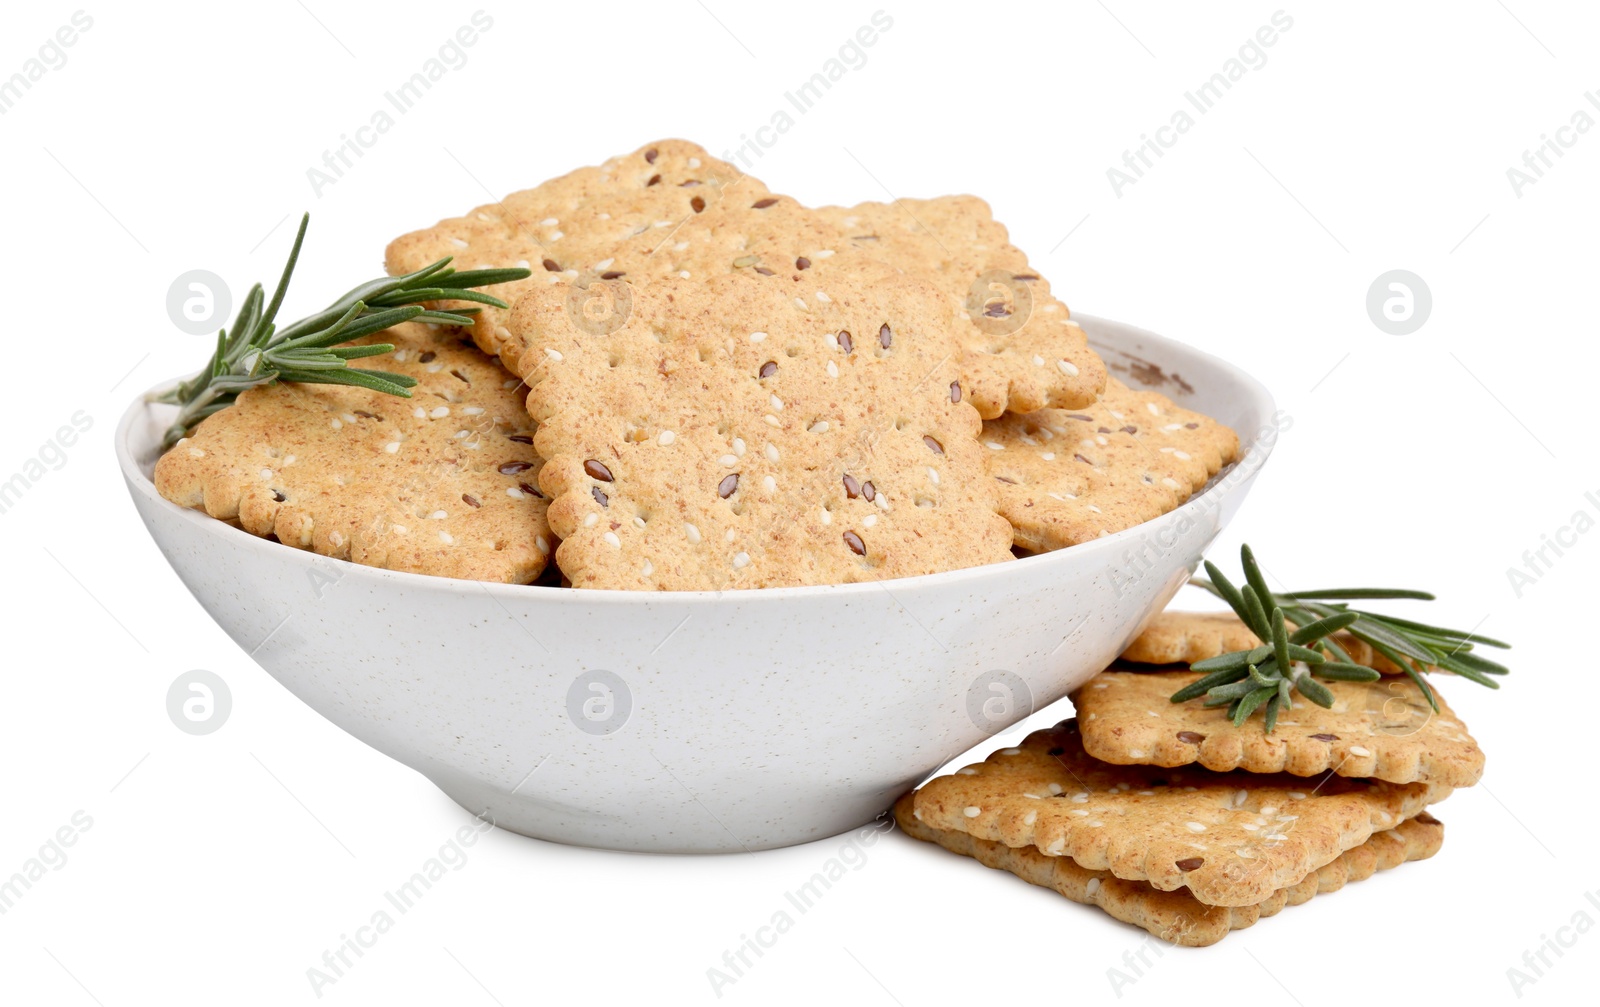 Photo of Cereal crackers with flax, sesame seeds and rosemary in bowl isolated on white